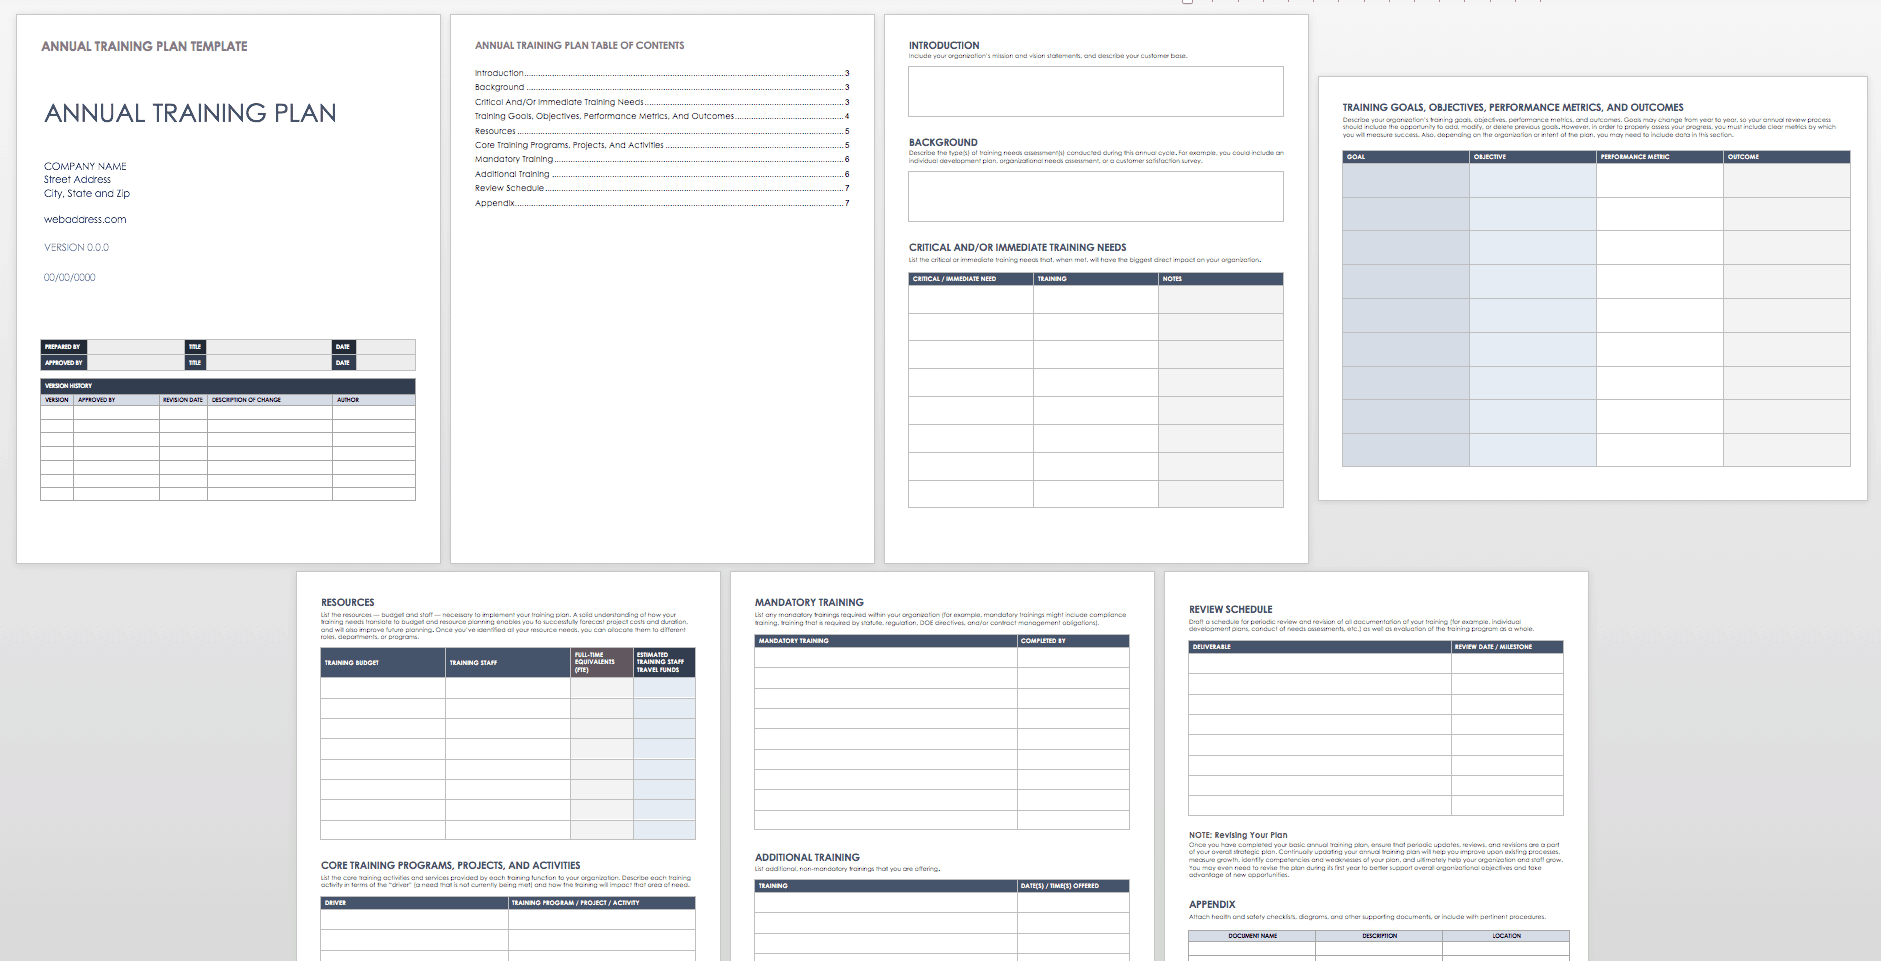 Free Training Plan Templates For Business Use | Smartsheet With Regard To Training Documentation Template Word